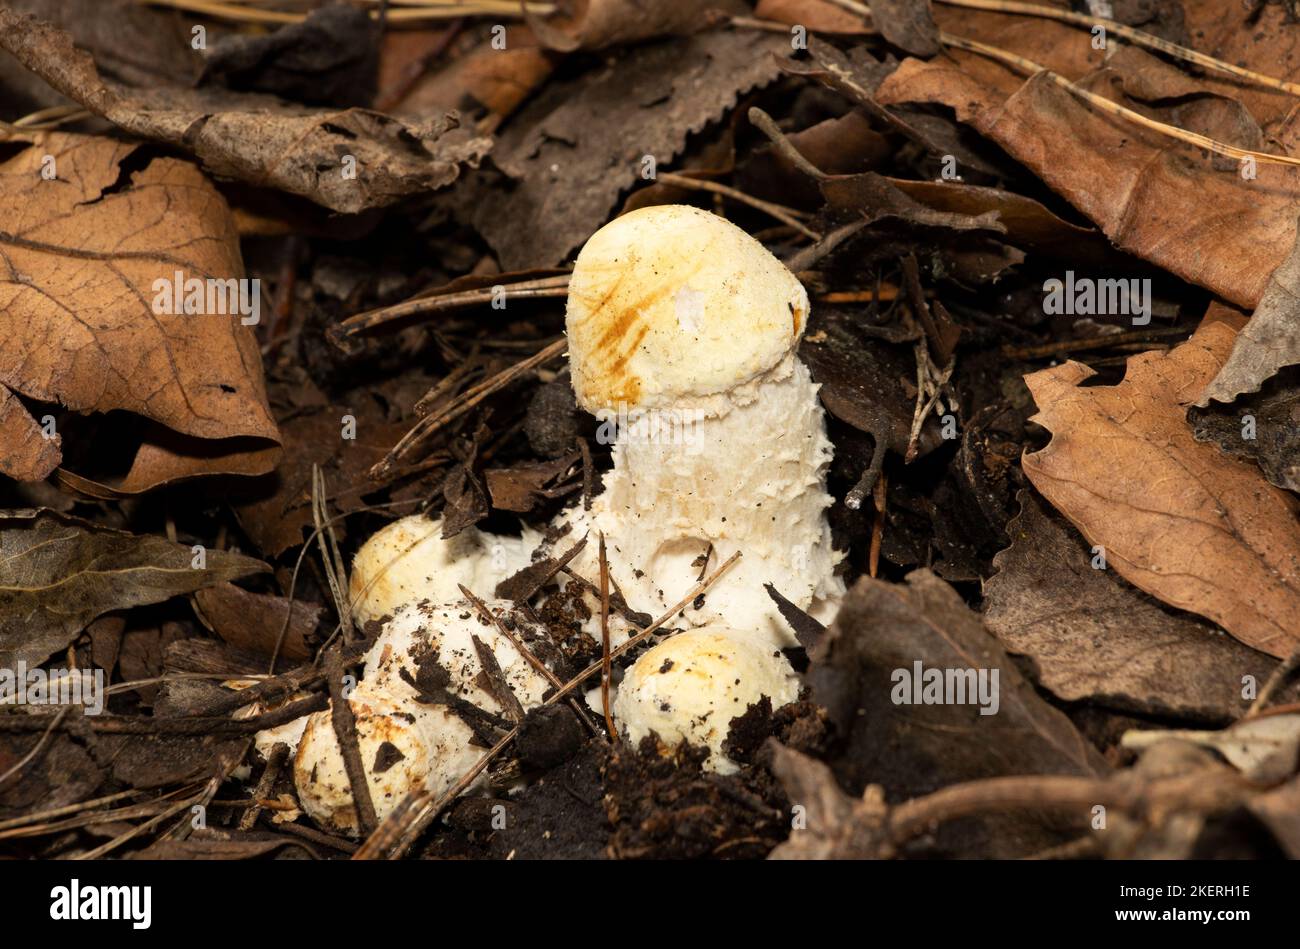 The Amanita Melter is a species-specific parasite of the Agaric Mushroom family. They prevent the developing of the Agaric fruiting bodyi Stock Photo